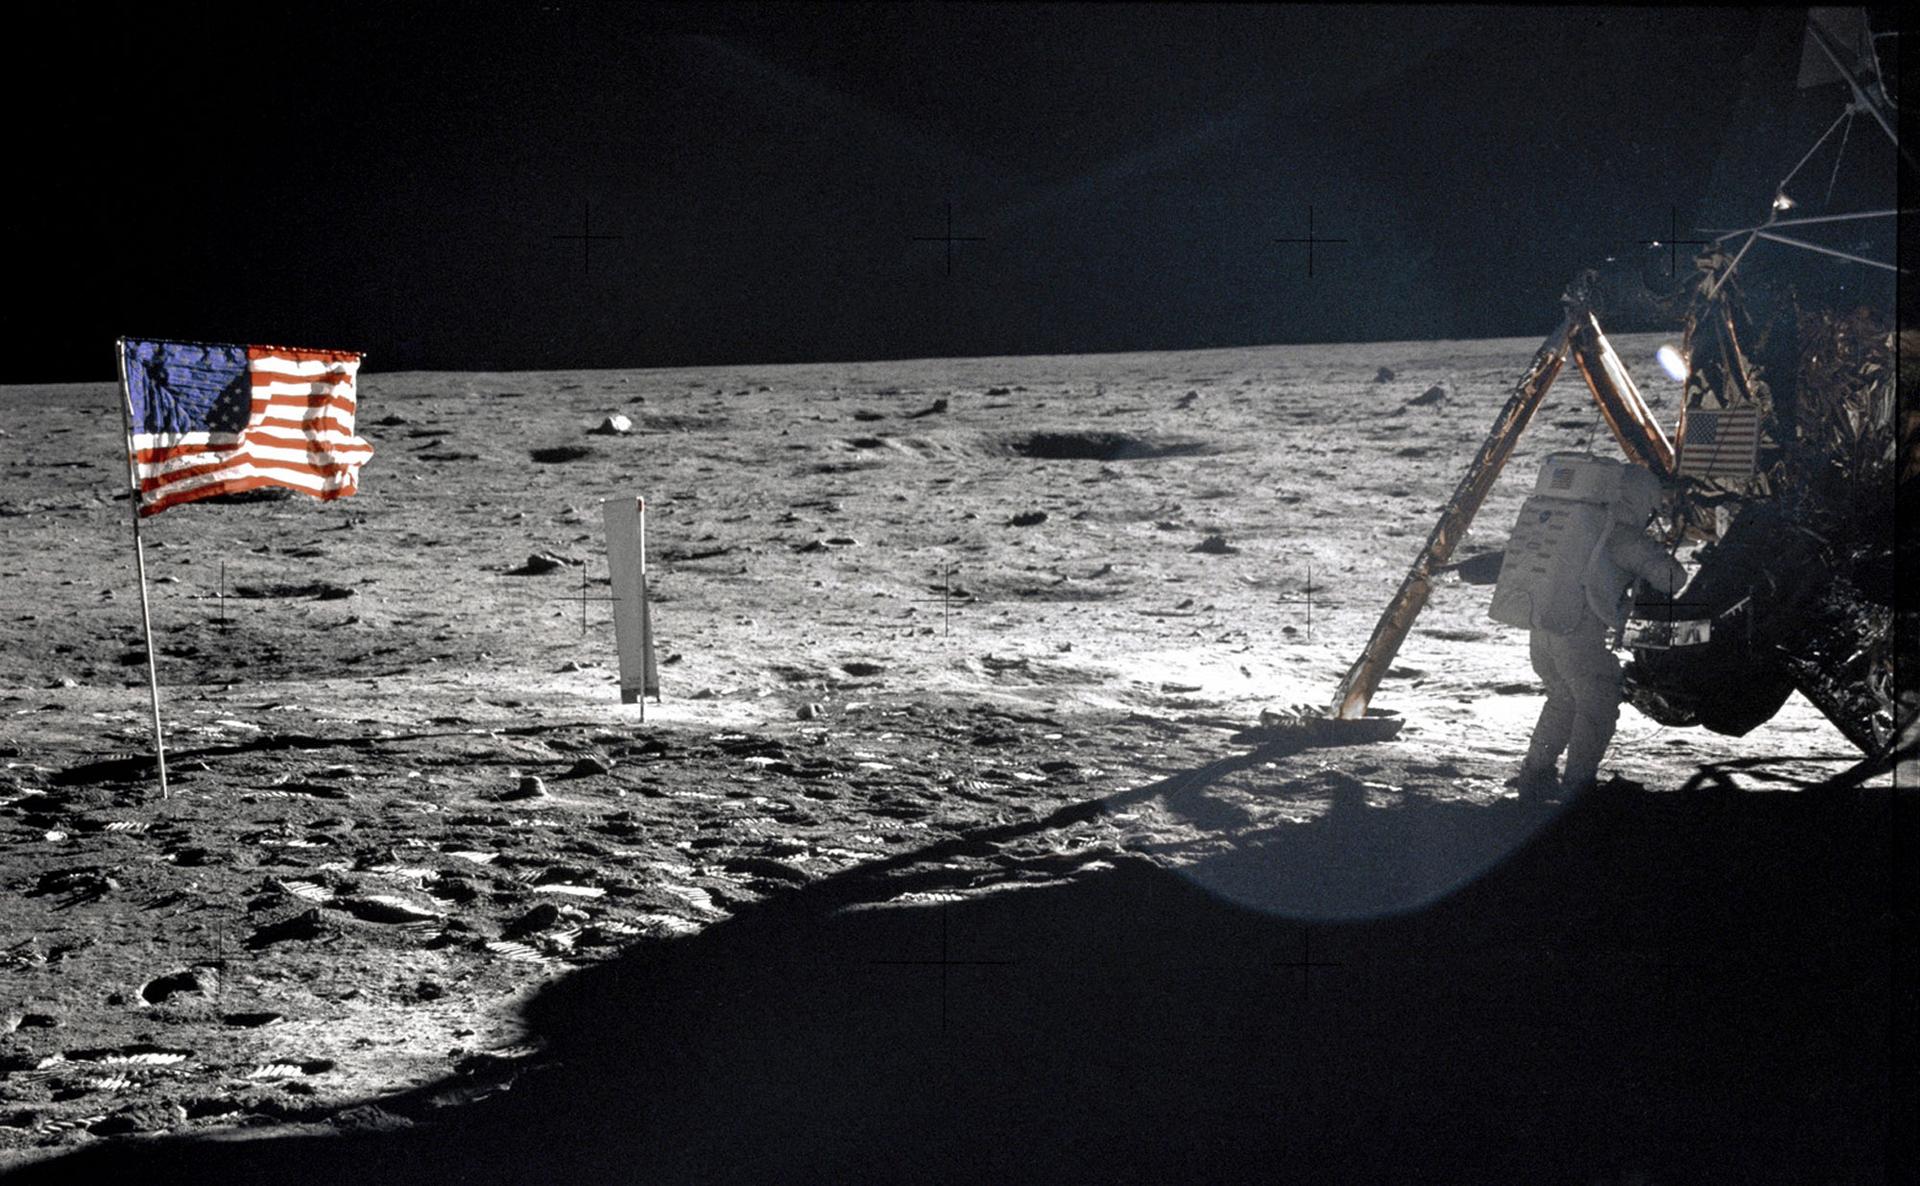 A US flag is shown on the moon adjacent to the Lunar Module.